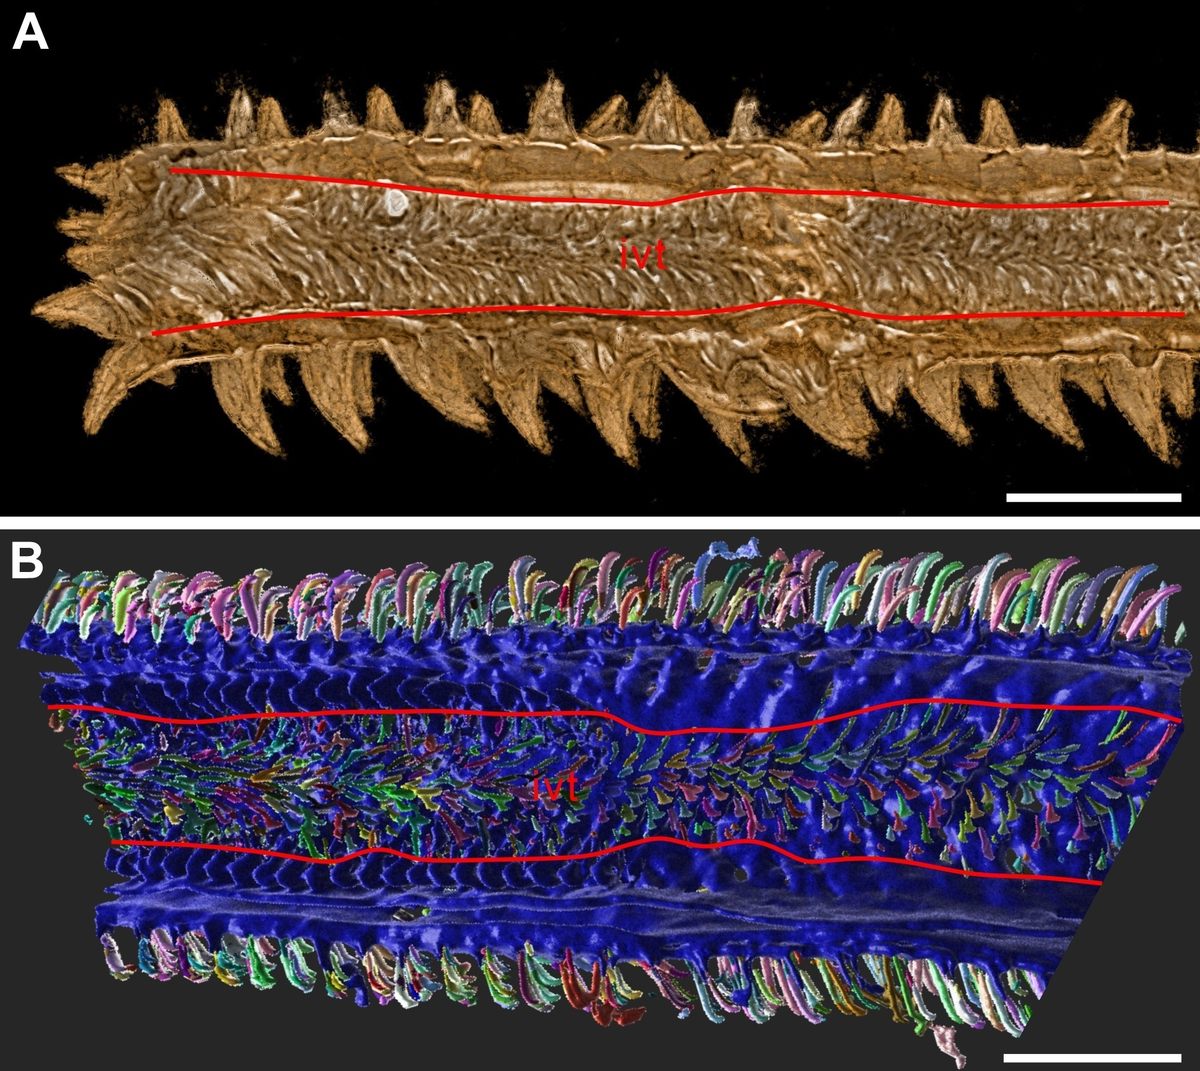 Scientists compared the internal structure of the fossil (A) with the tentacle of an extant trypanorhynch tapeworm (B).